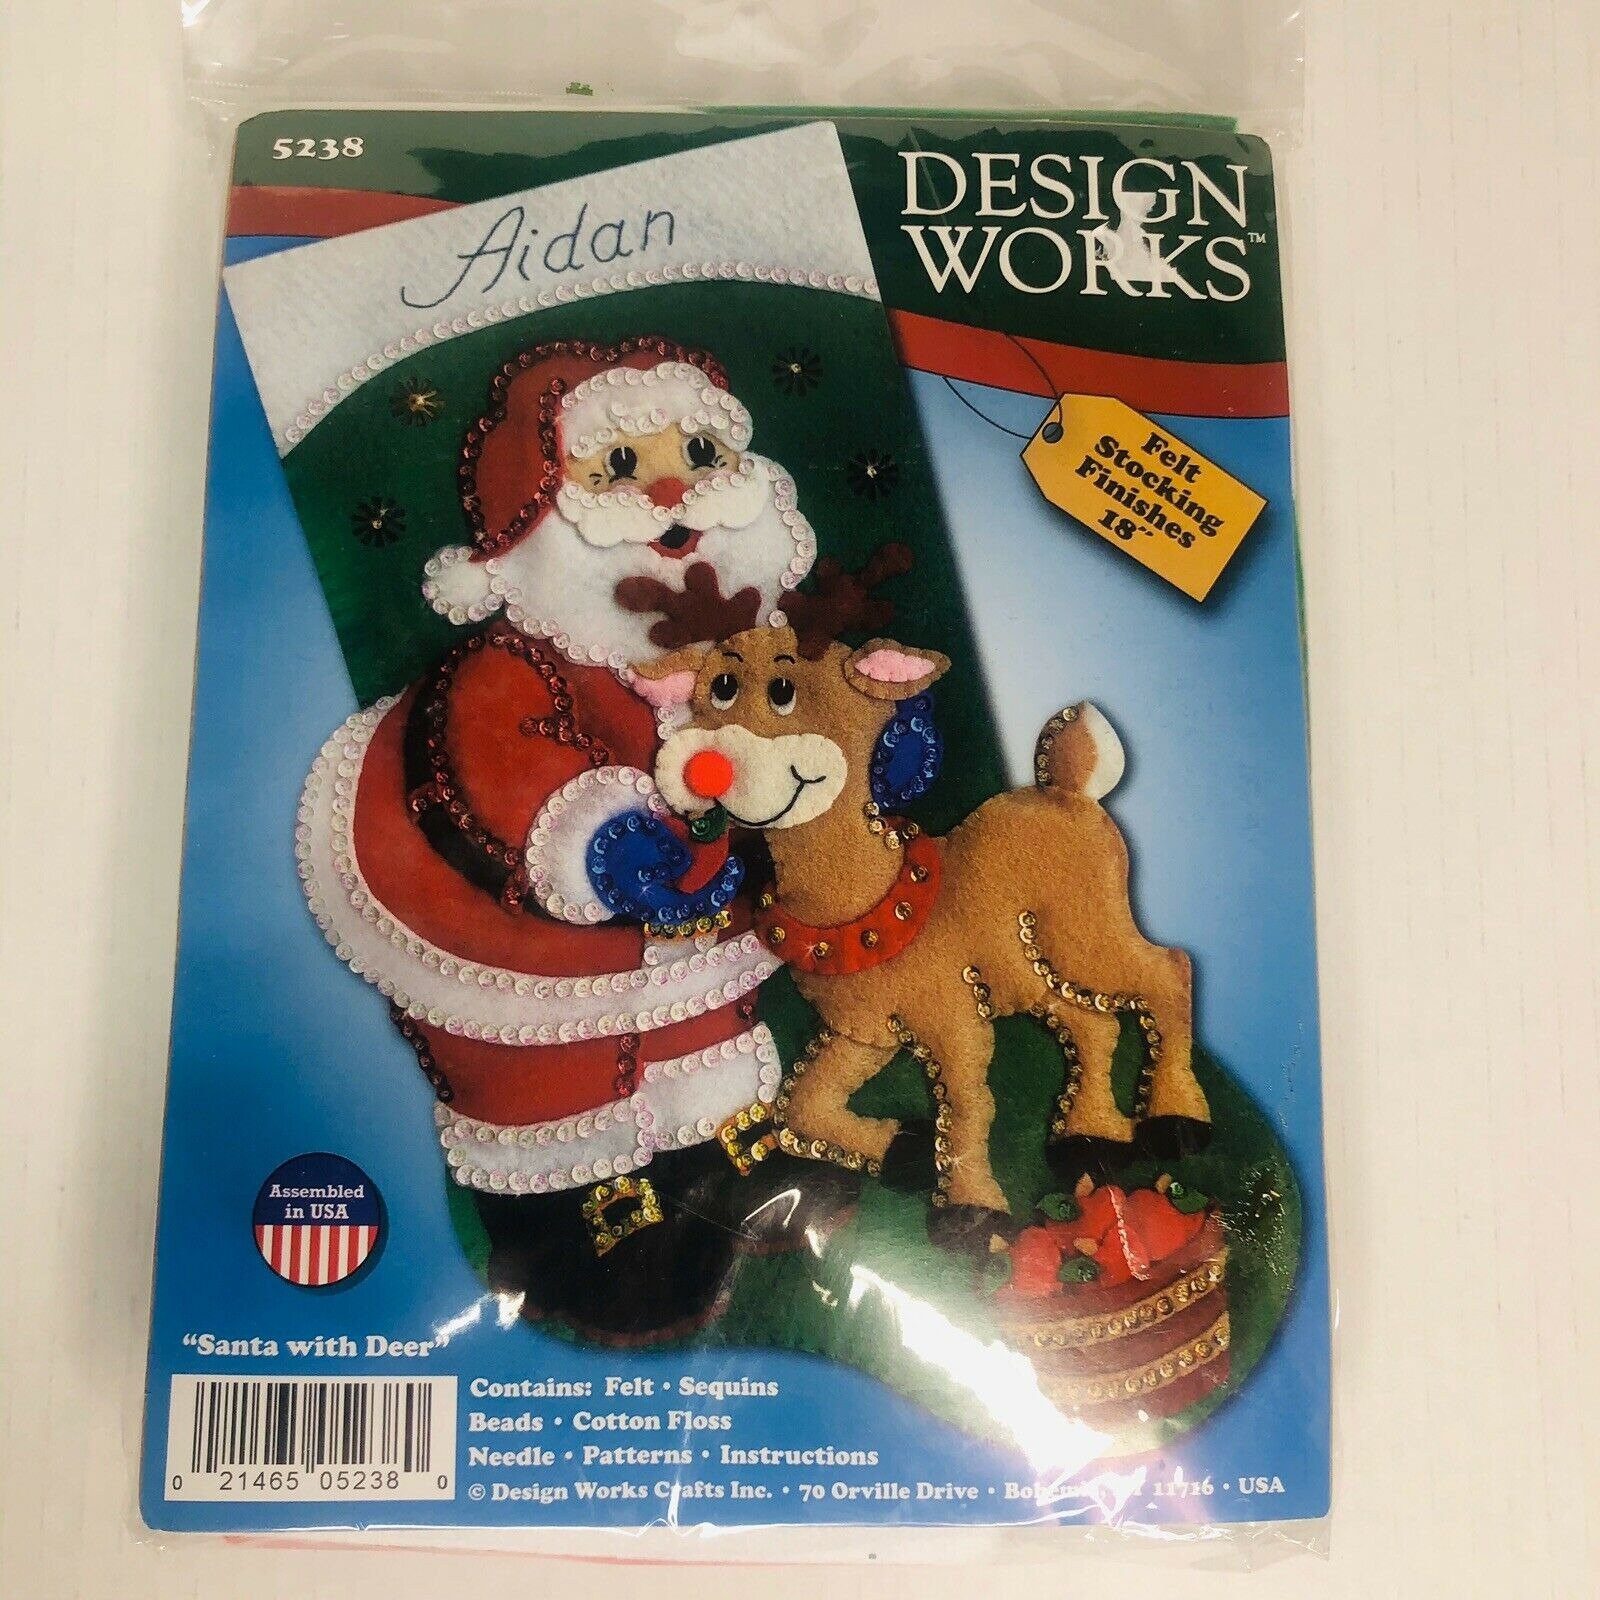 Design Works Trim the Tree Counted Cross Stitch Stocking Kit